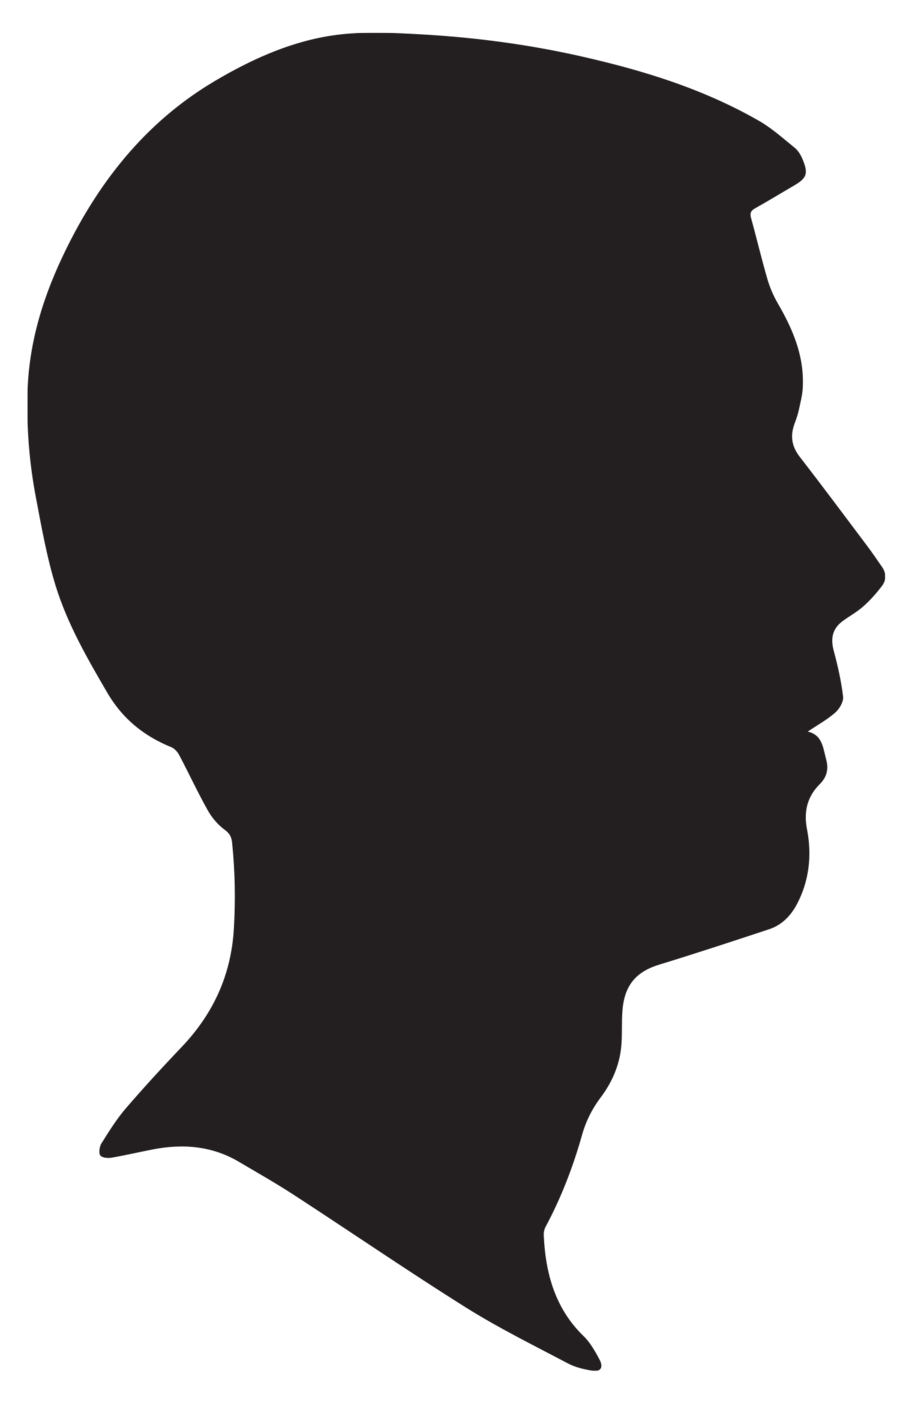 Clipart library: More Like Male Silhouette Profile by snicklefritz-stock